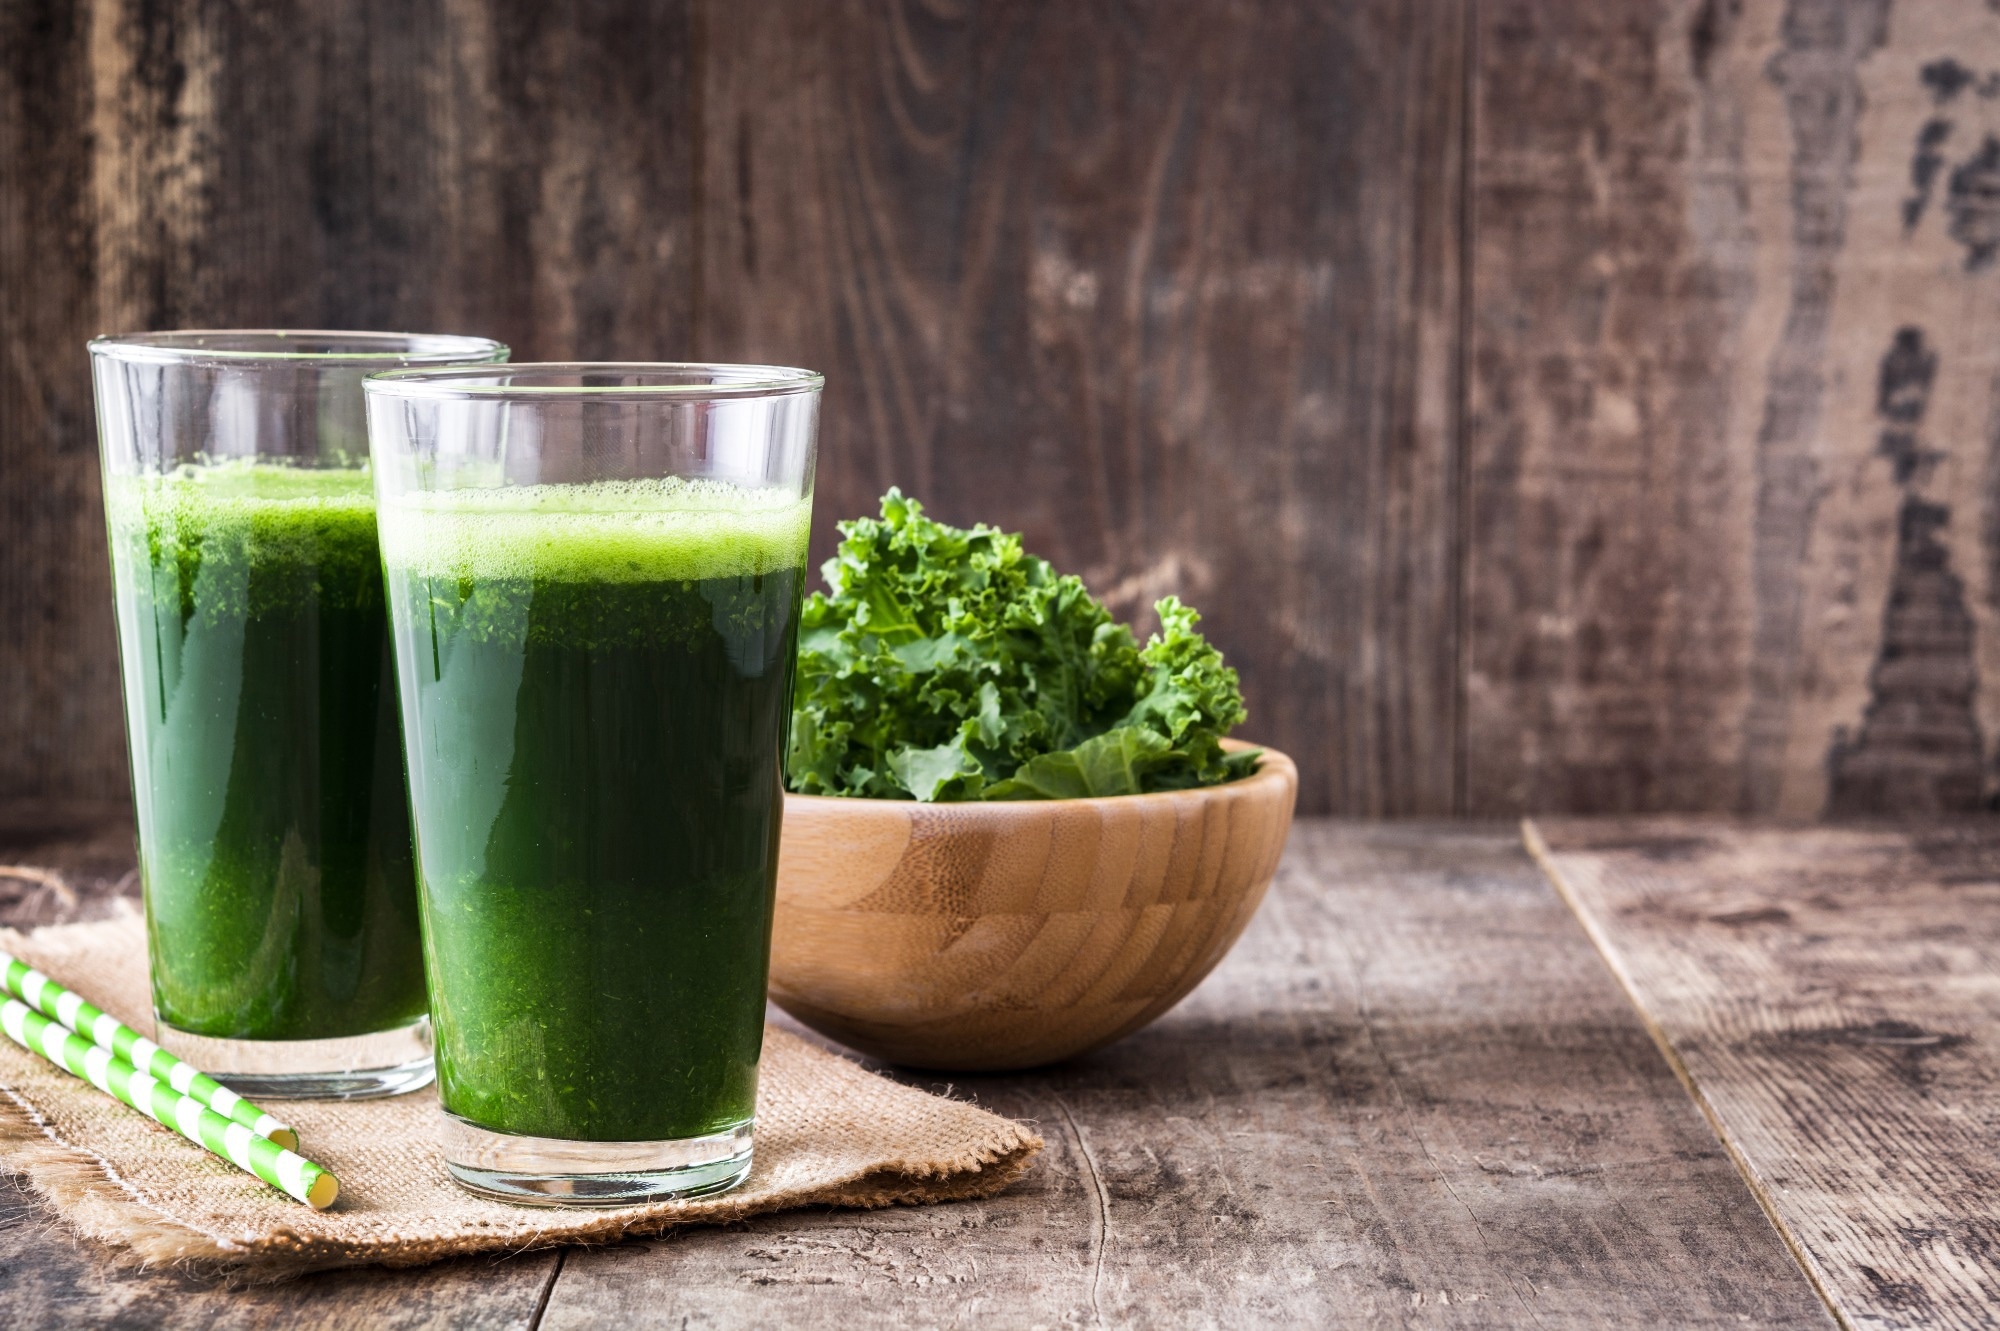 Study: Synergistic Antioxidant and Anti-Inflammatory Activities of Kale Juice Fermented with Limosilactobacills reuteri EFEL6901 or Limosilactobacills fermentum EFEL6800. Image Credit: etorres / Shutterstock.com